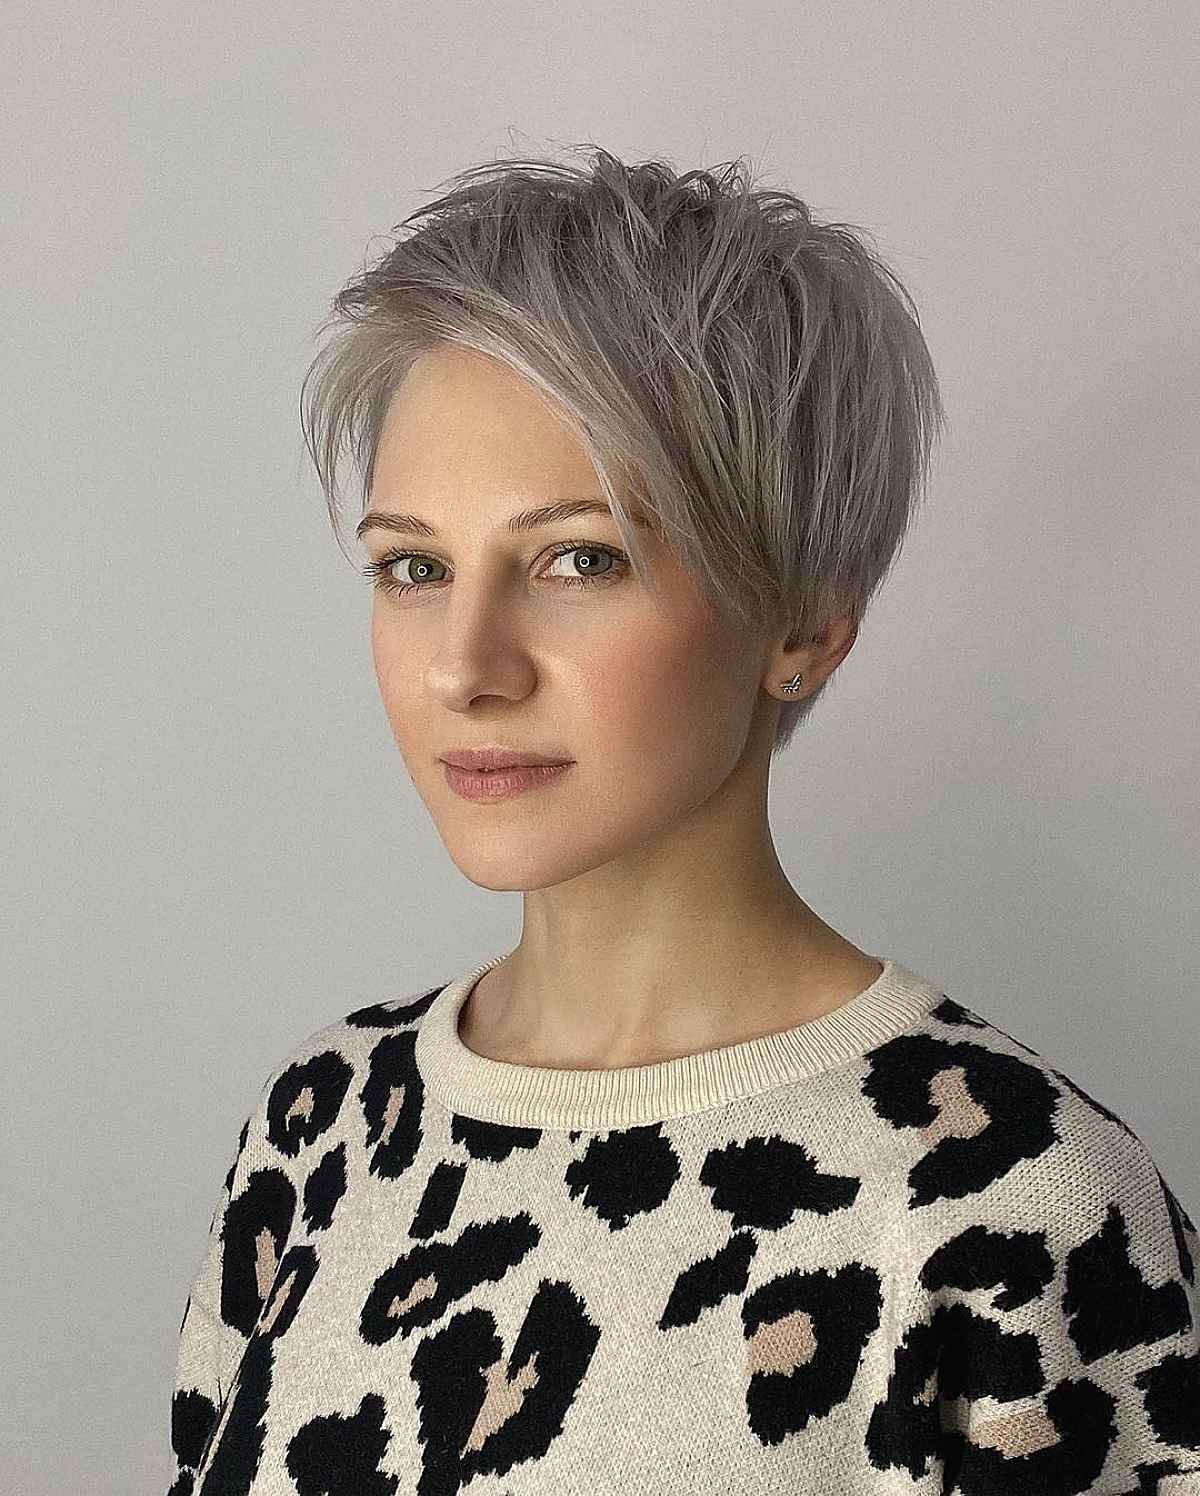 Ideas to go blonde - short icy balayage - allthestufficareabout.com